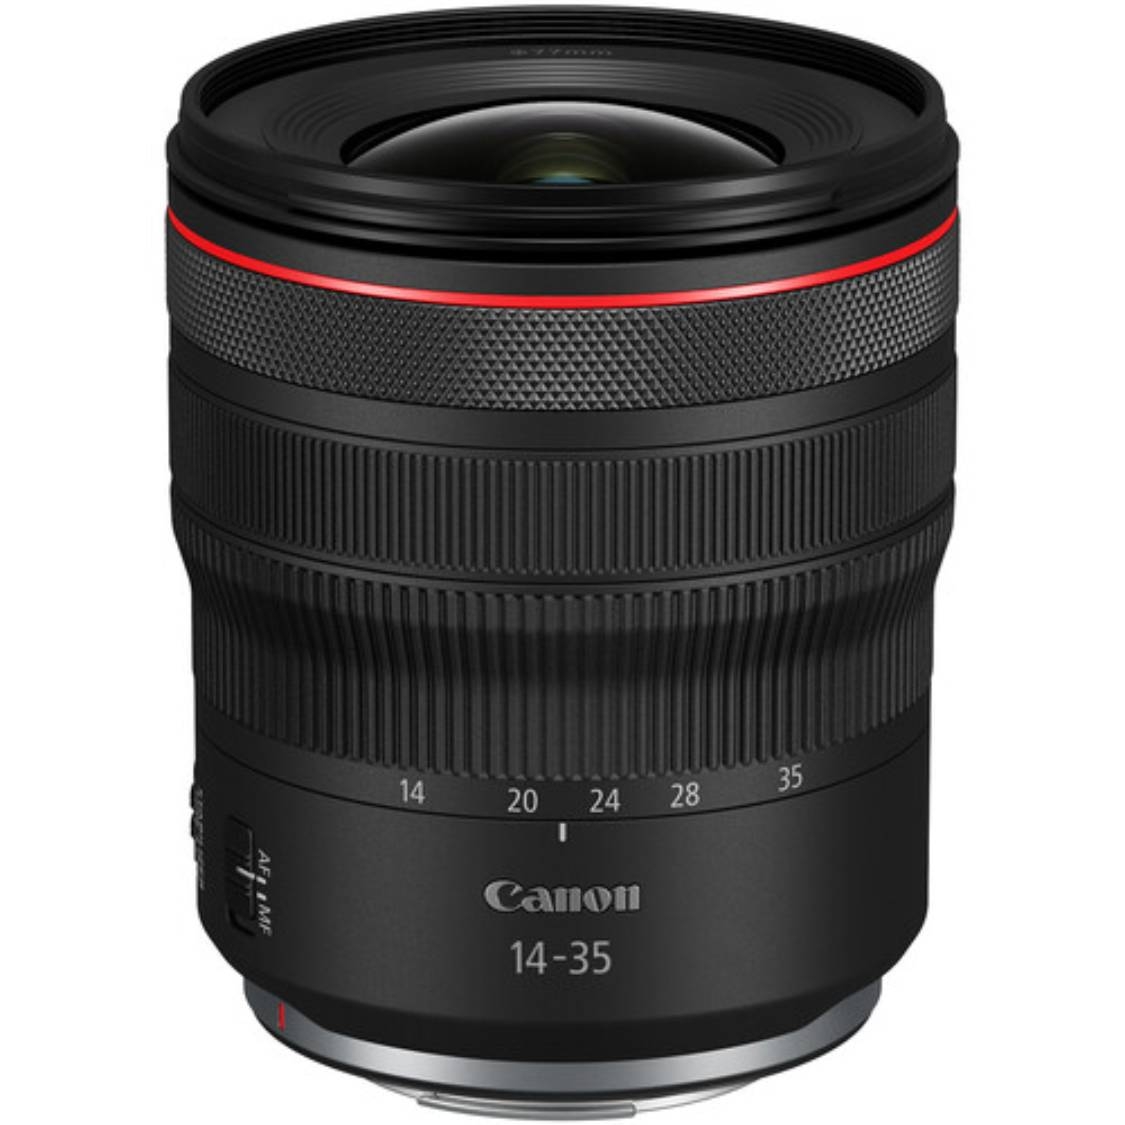 Canon RF 14-35mm f4.0L IS USM Lens